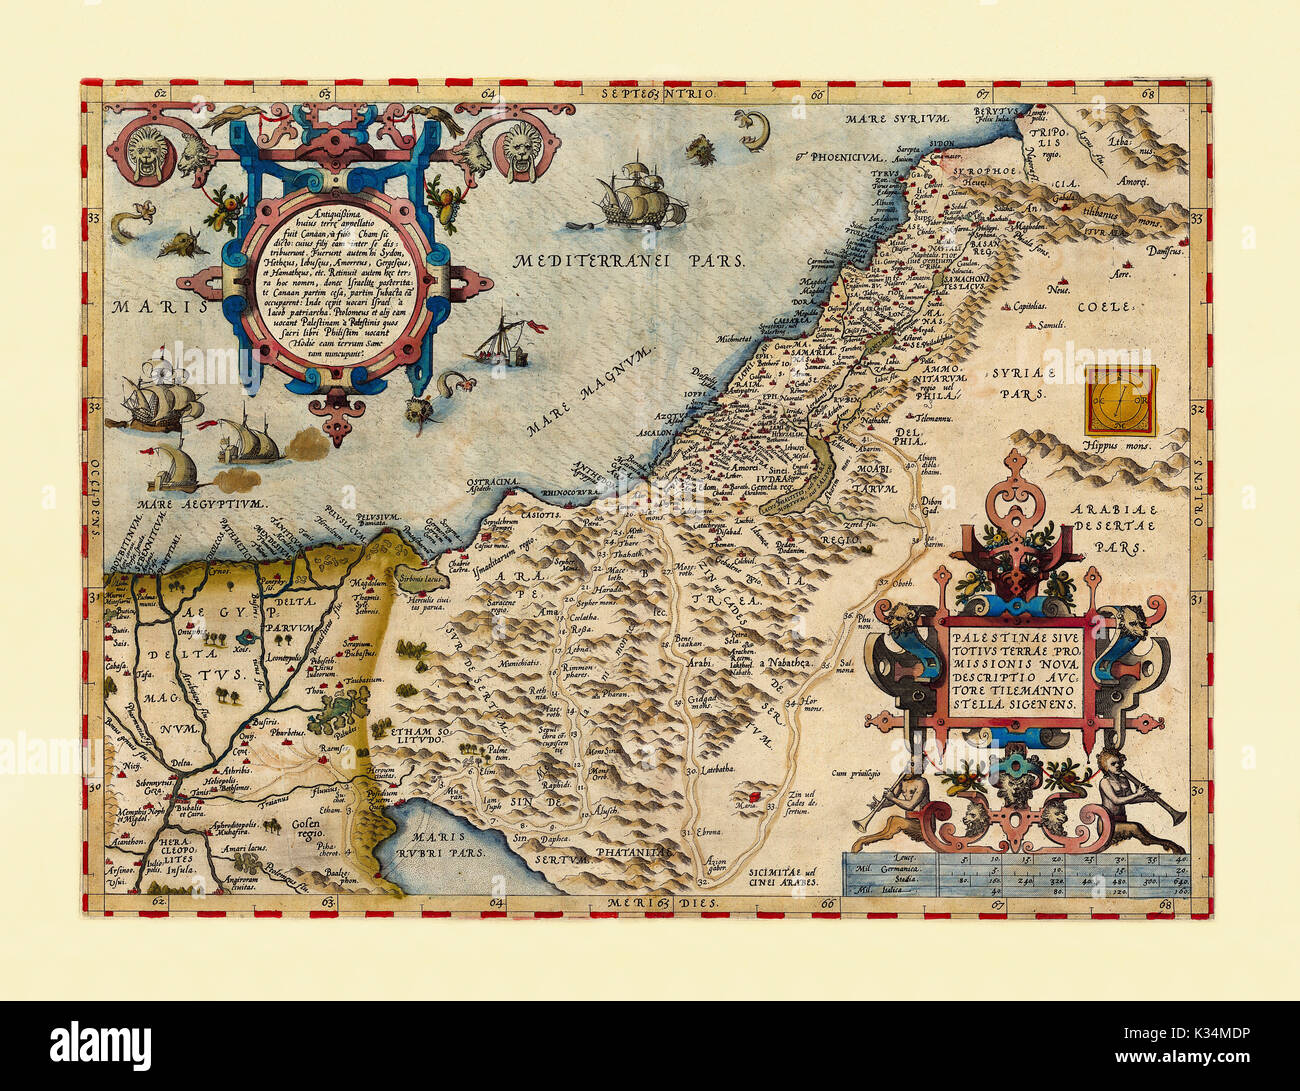 Old map of Palestina. Excellent state of preservation realized in ancient style. All the graphic composition is inside a frame. By Ortelius, Theatrum Orbis Terrarum, Antwerp, 1570 Stock Photo